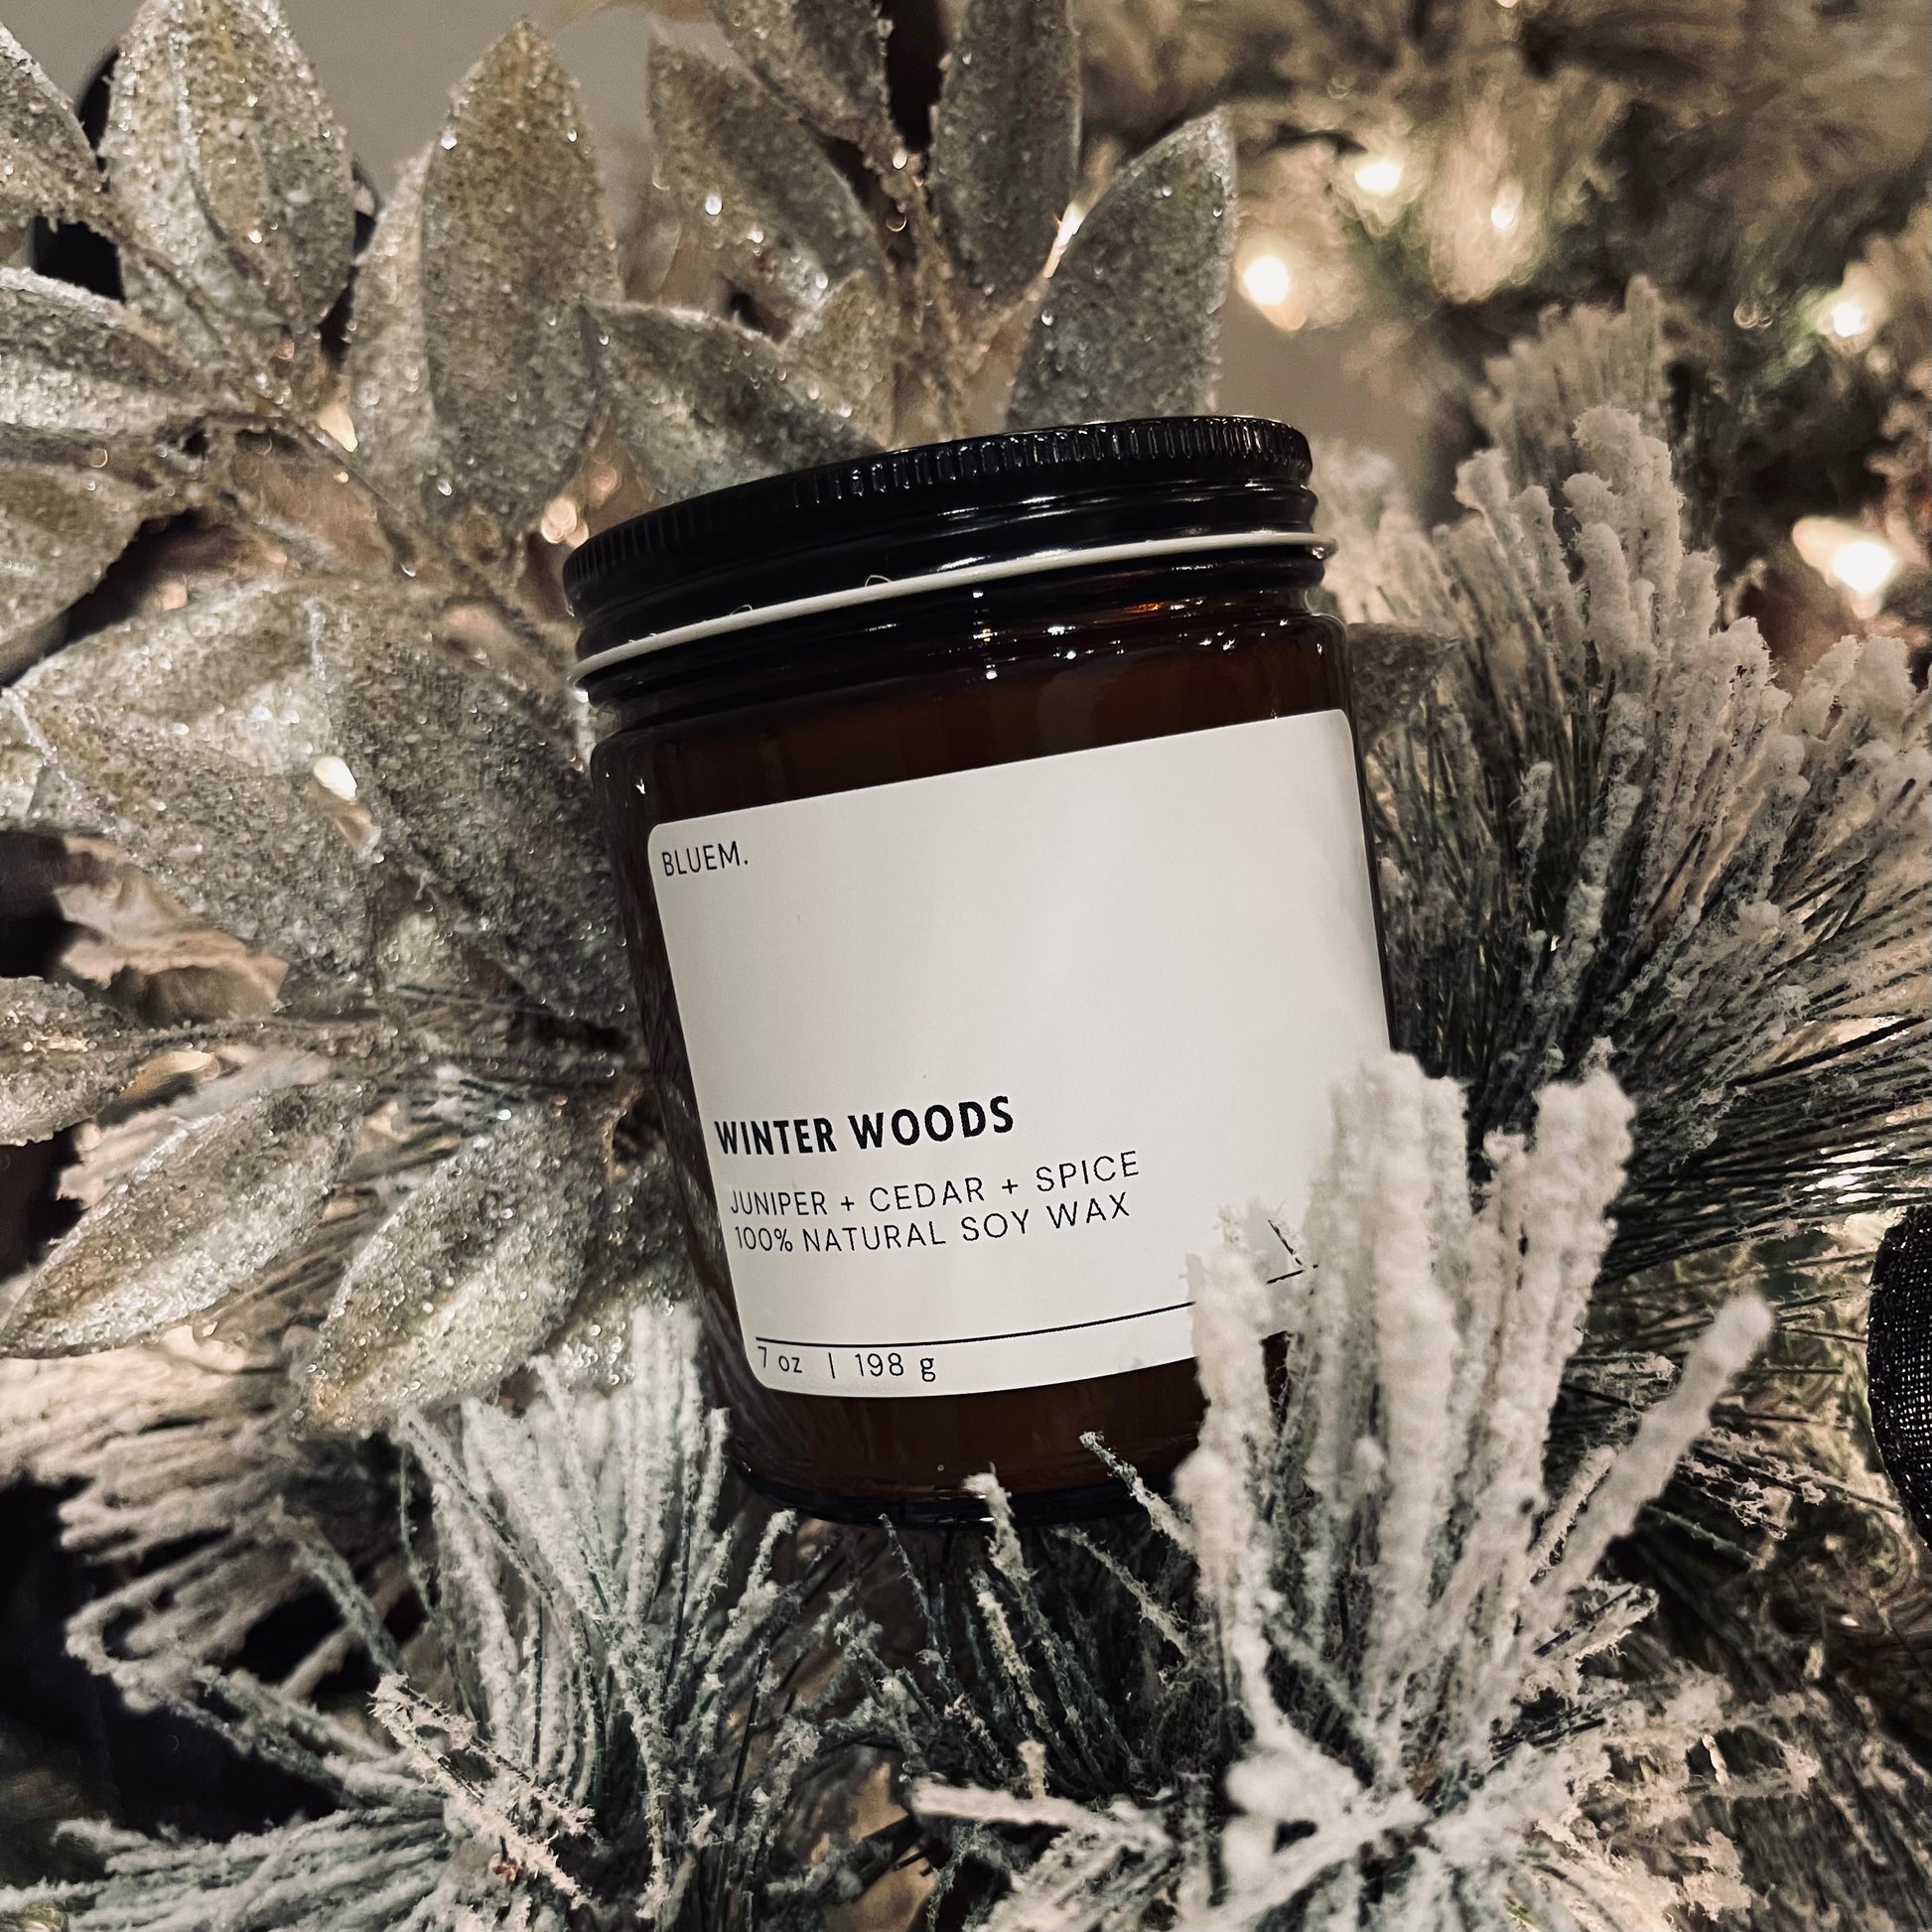 Winter Woods Candle - Bluem. Coffee